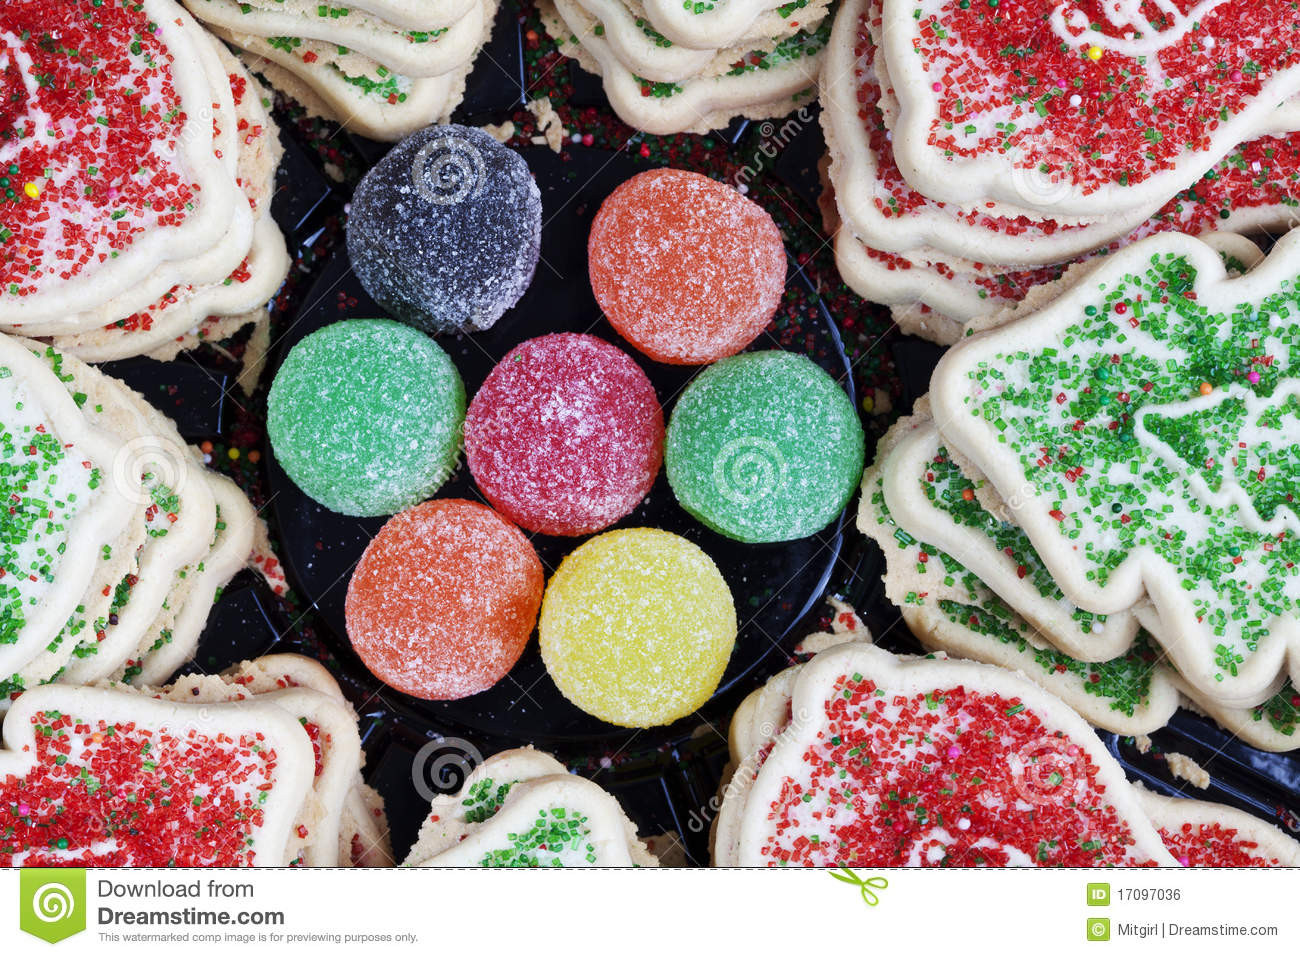 Sugar Free Christmas Candy
 Christmas Cookies And Sugar Candy Royalty Free Stock Image